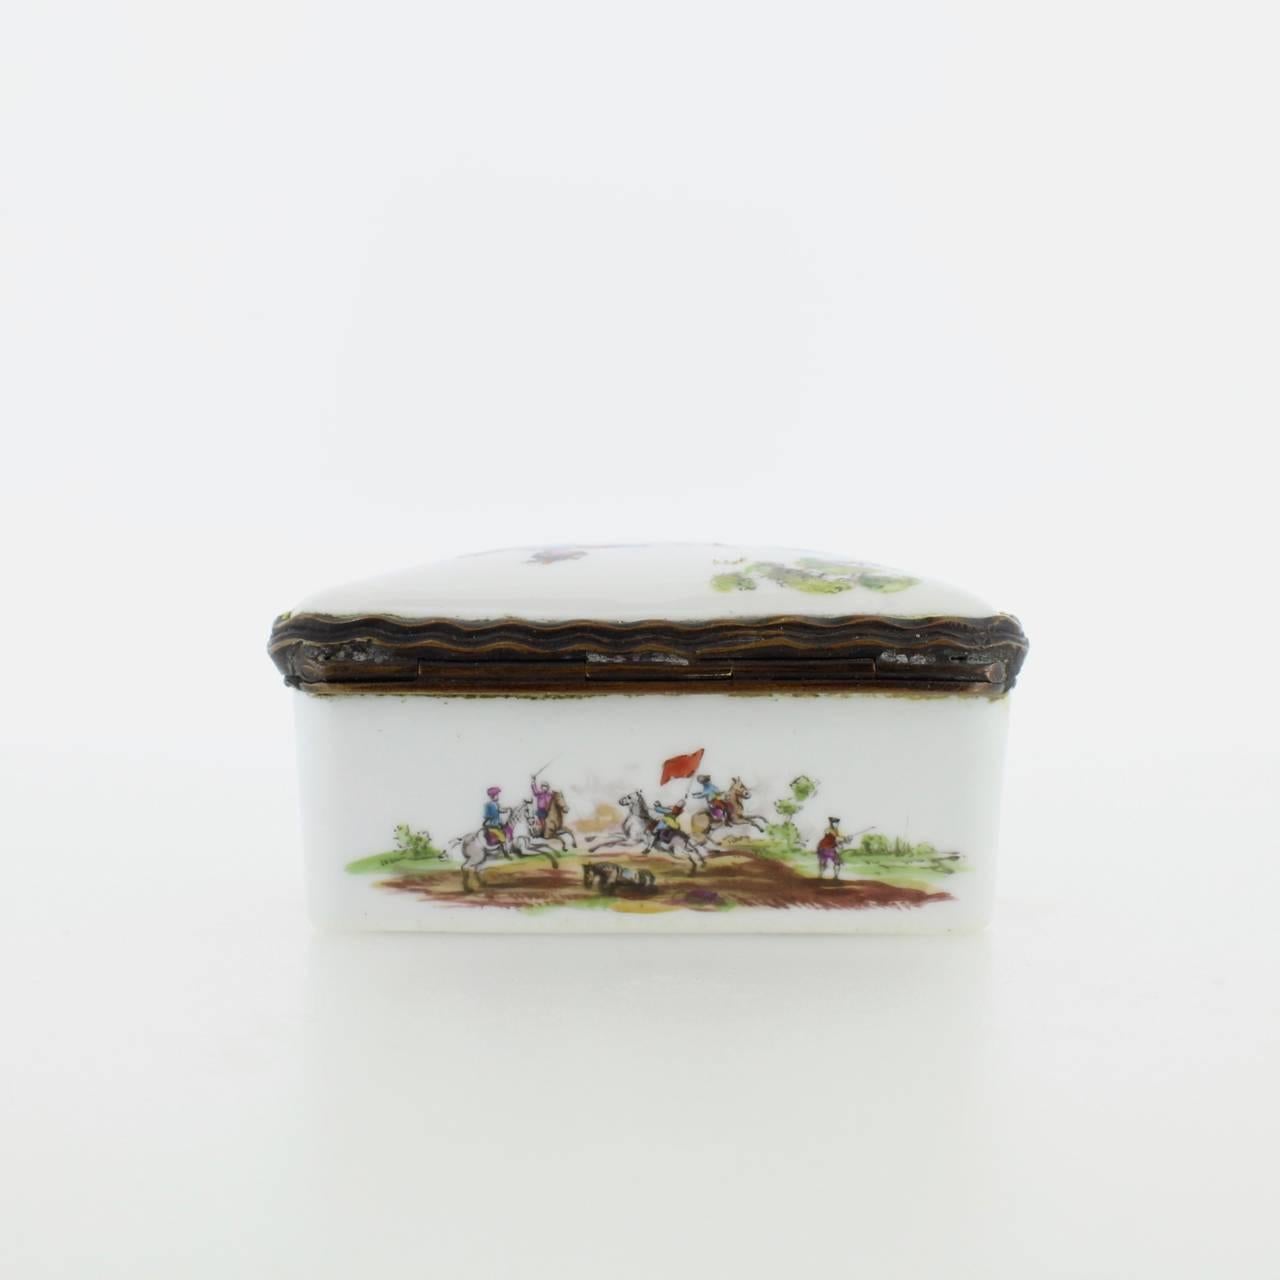 Antique French or German Porcelain Snuff Box with Hand-Painted Military Scenes For Sale 2